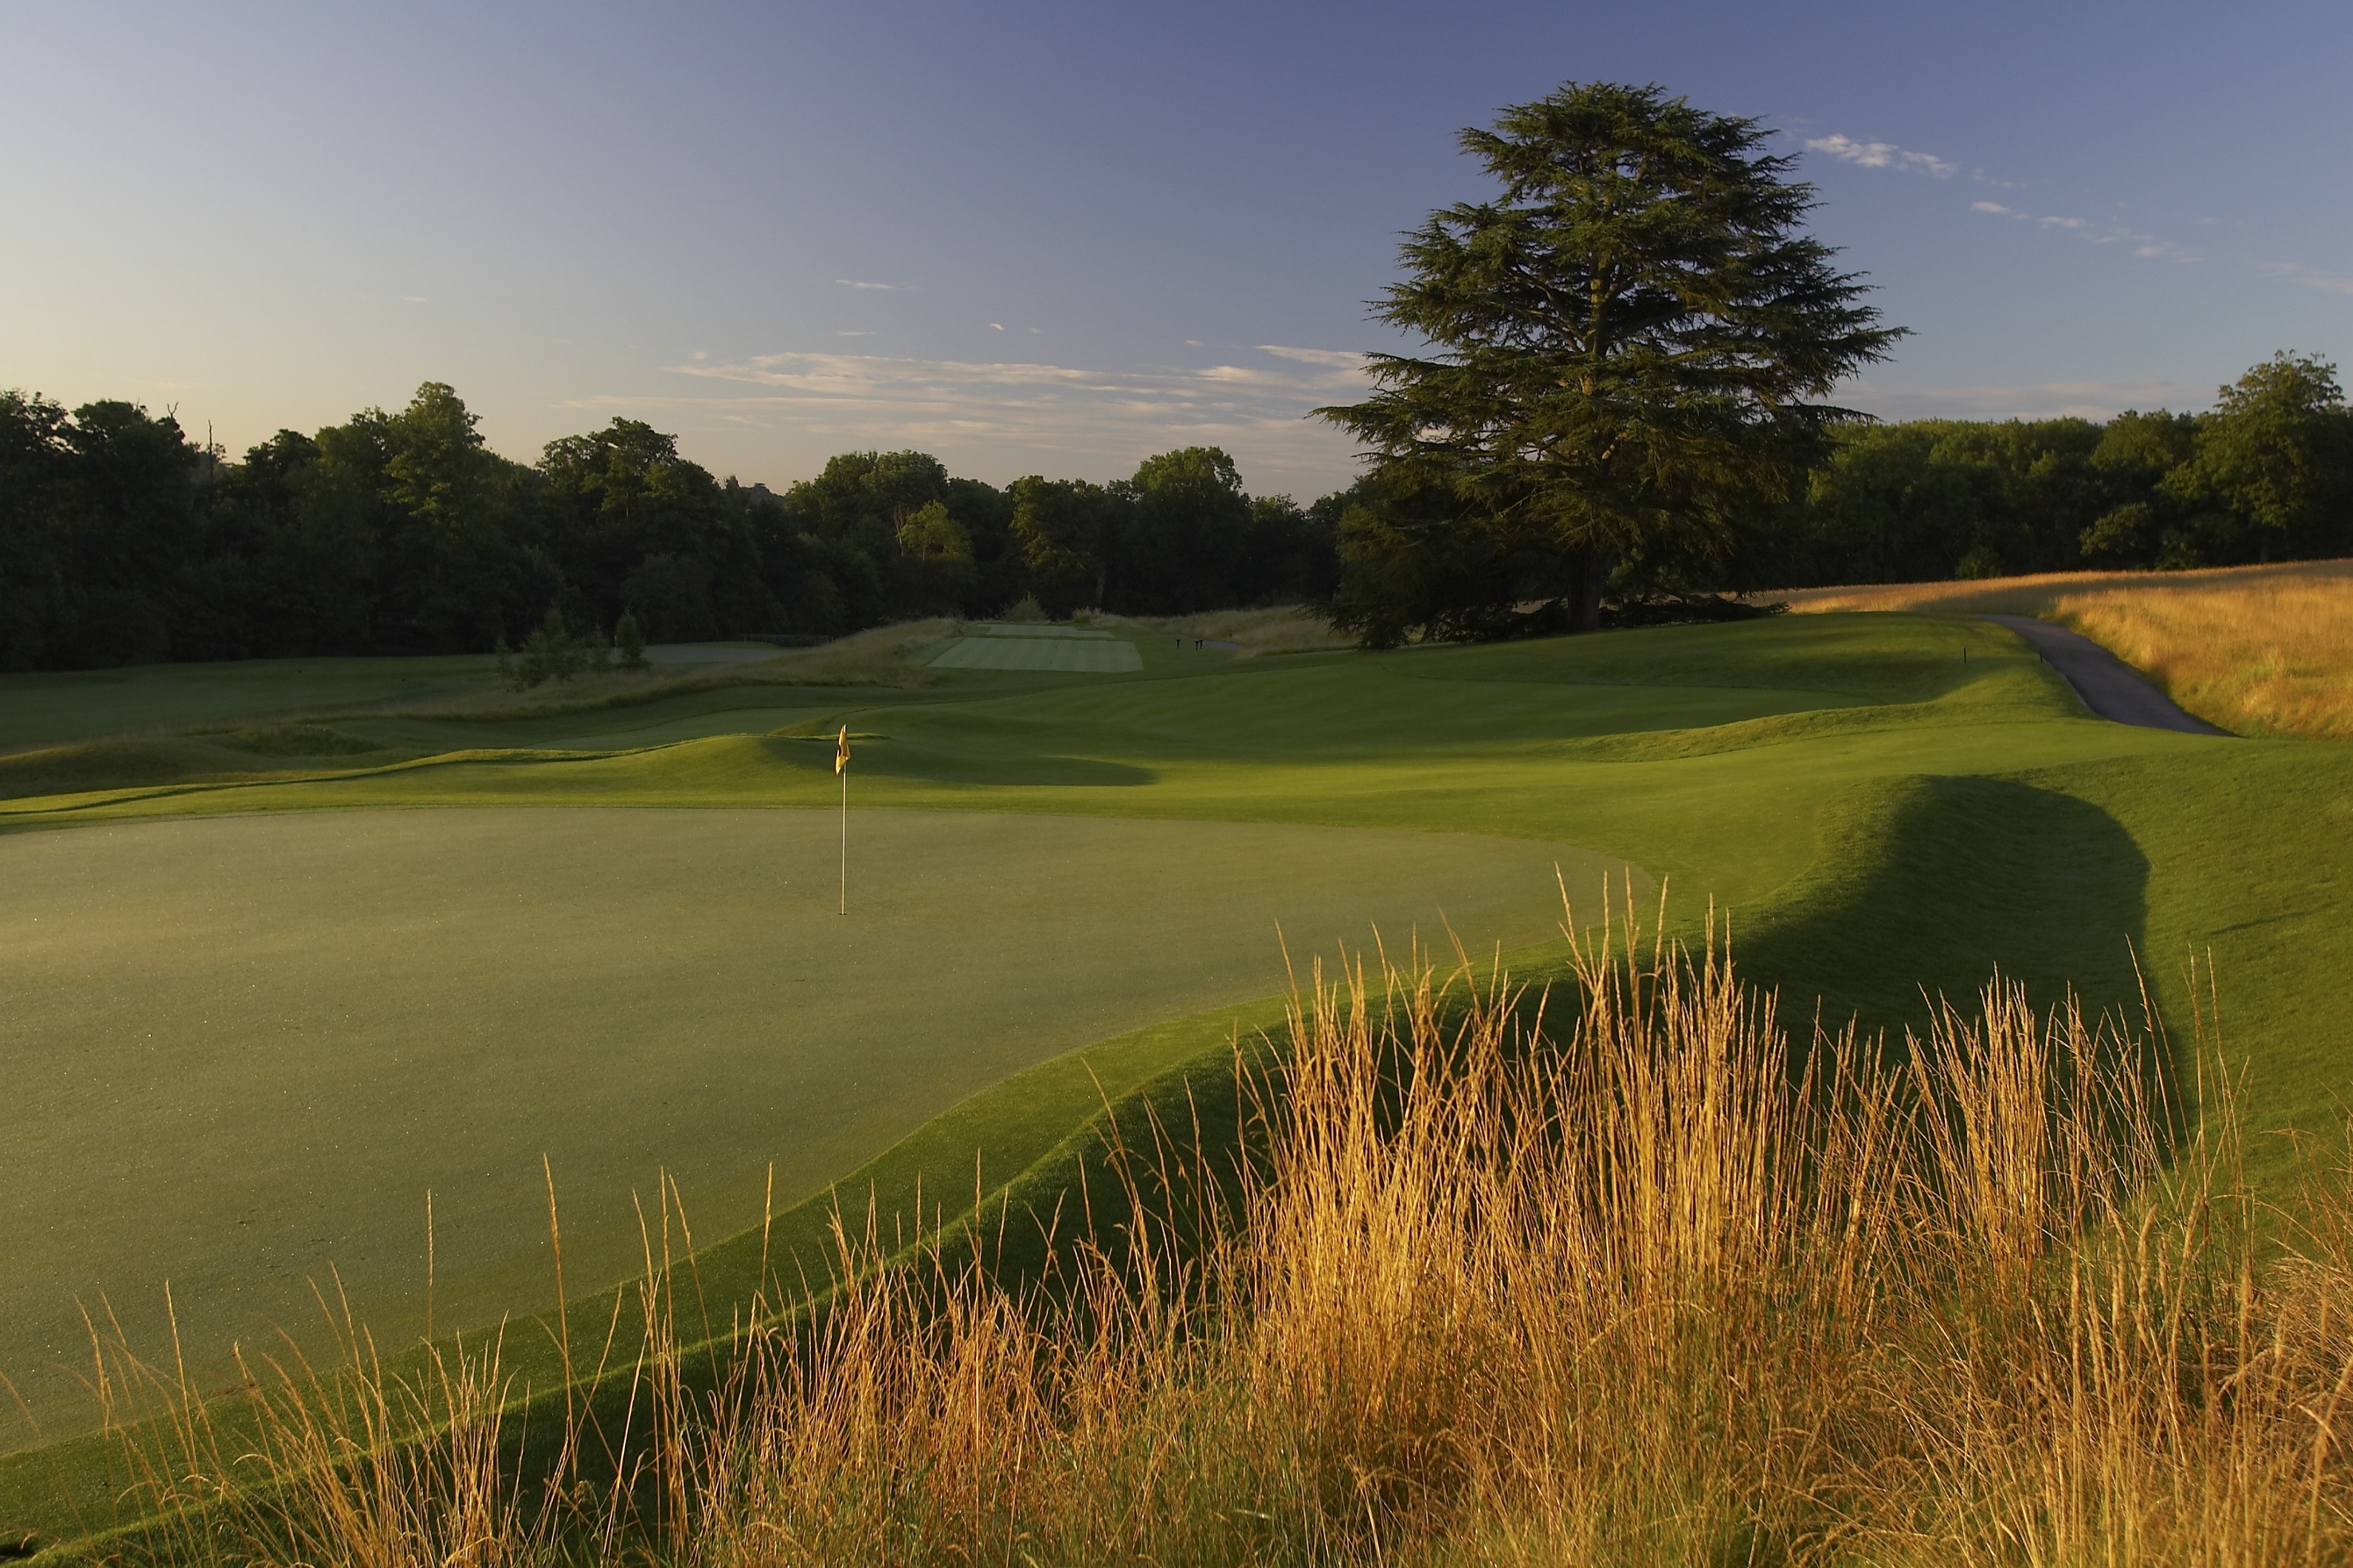 The Grove's greens are the standout feature of the course